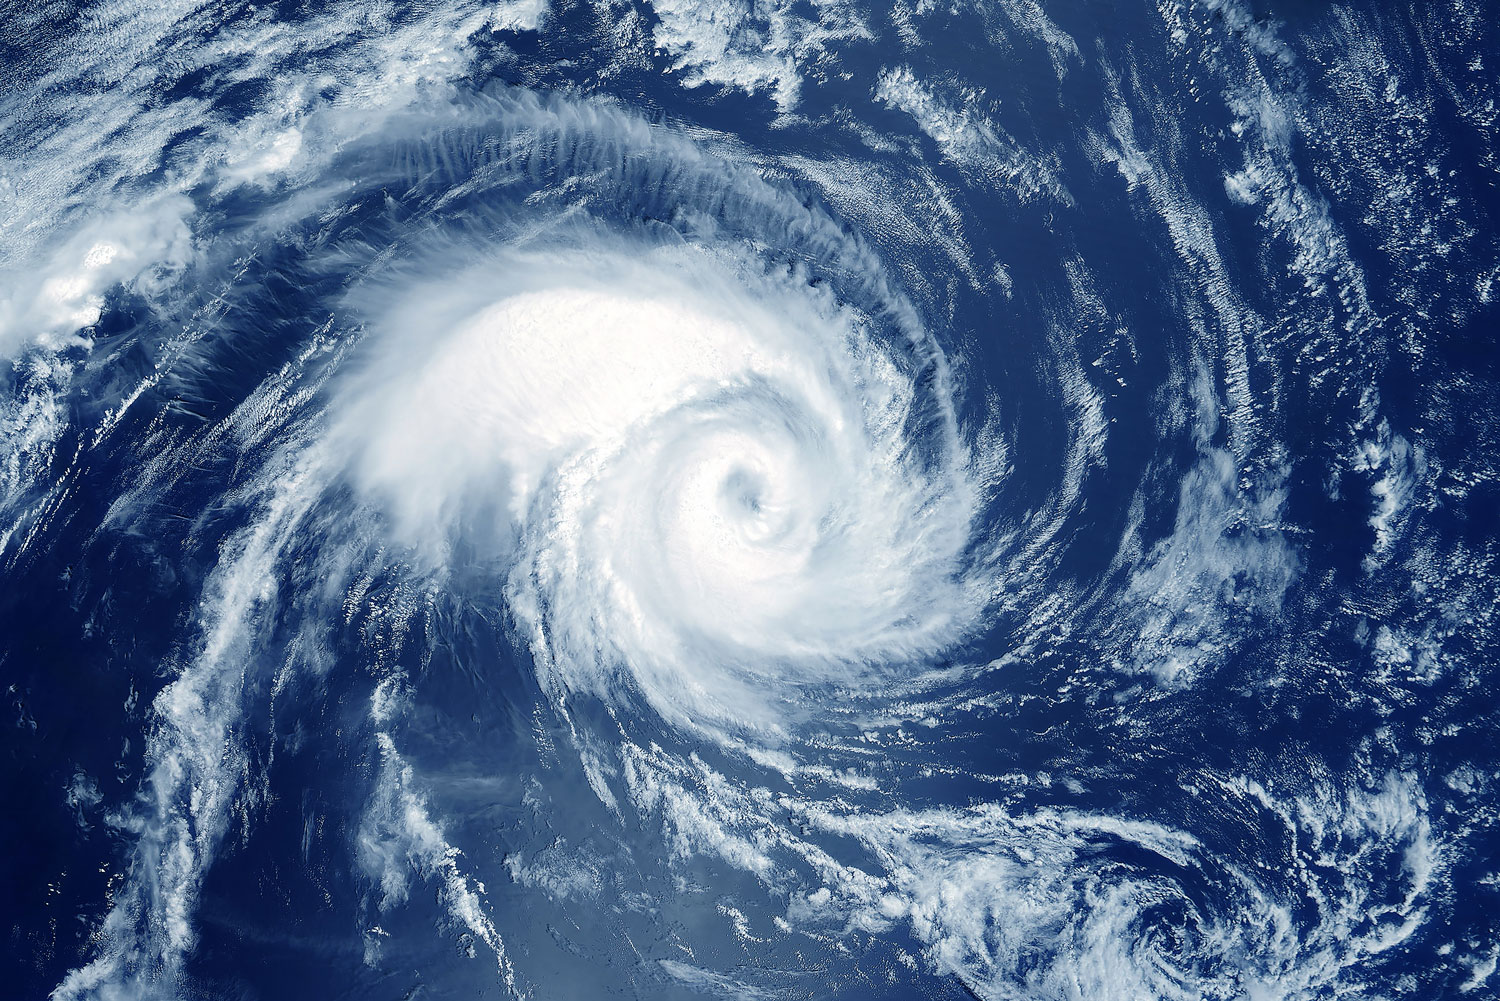 Hurricane Season Is Approaching: What You Need to Be Prepared